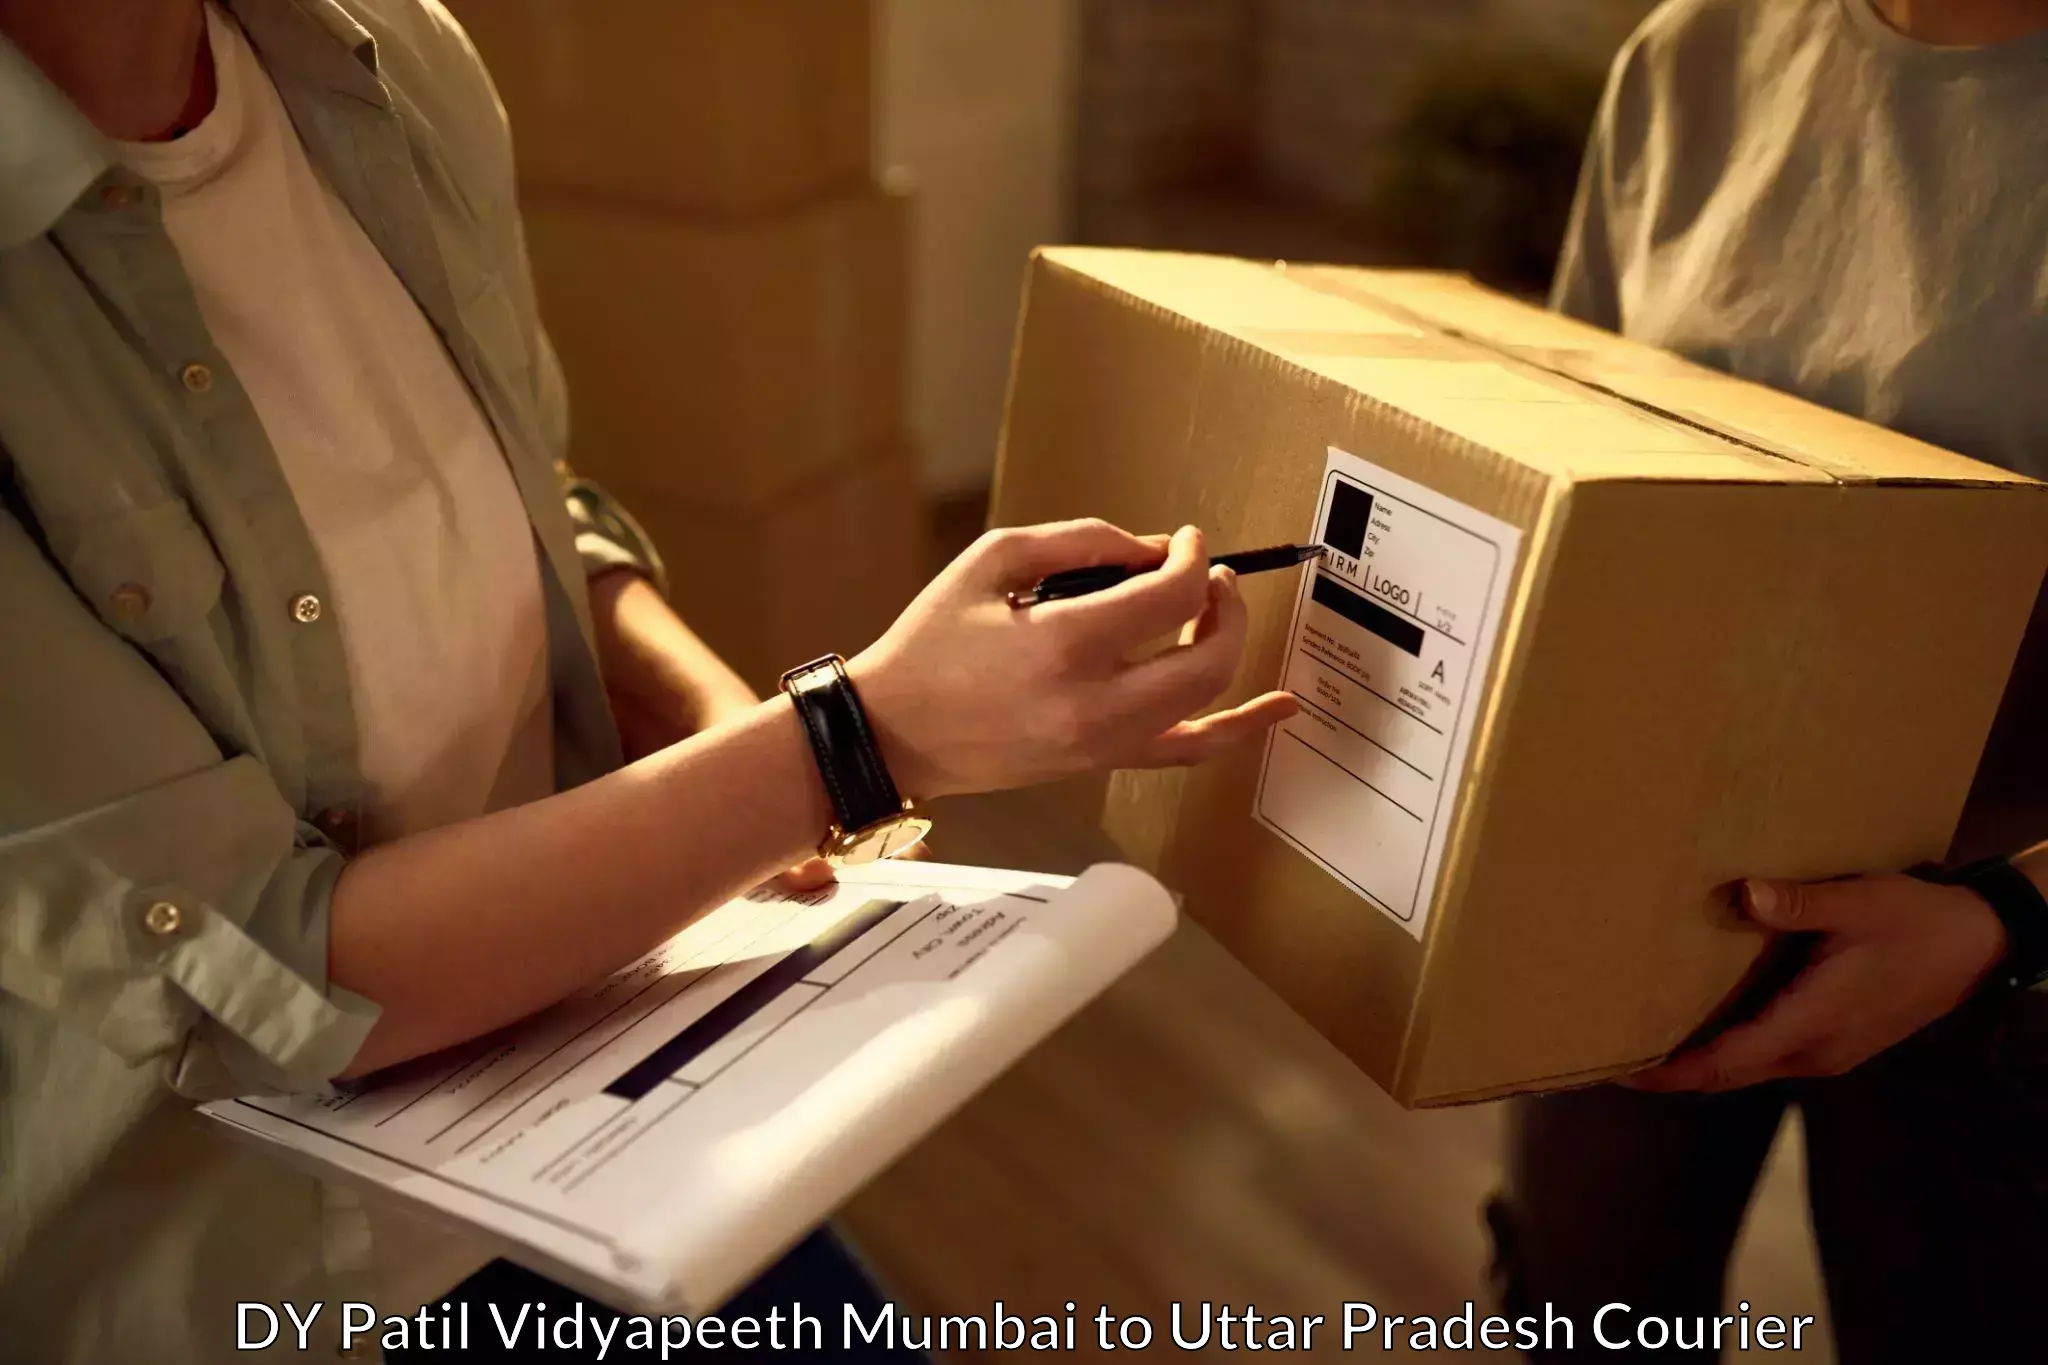 Express courier capabilities in DY Patil Vidyapeeth Mumbai to Amroha